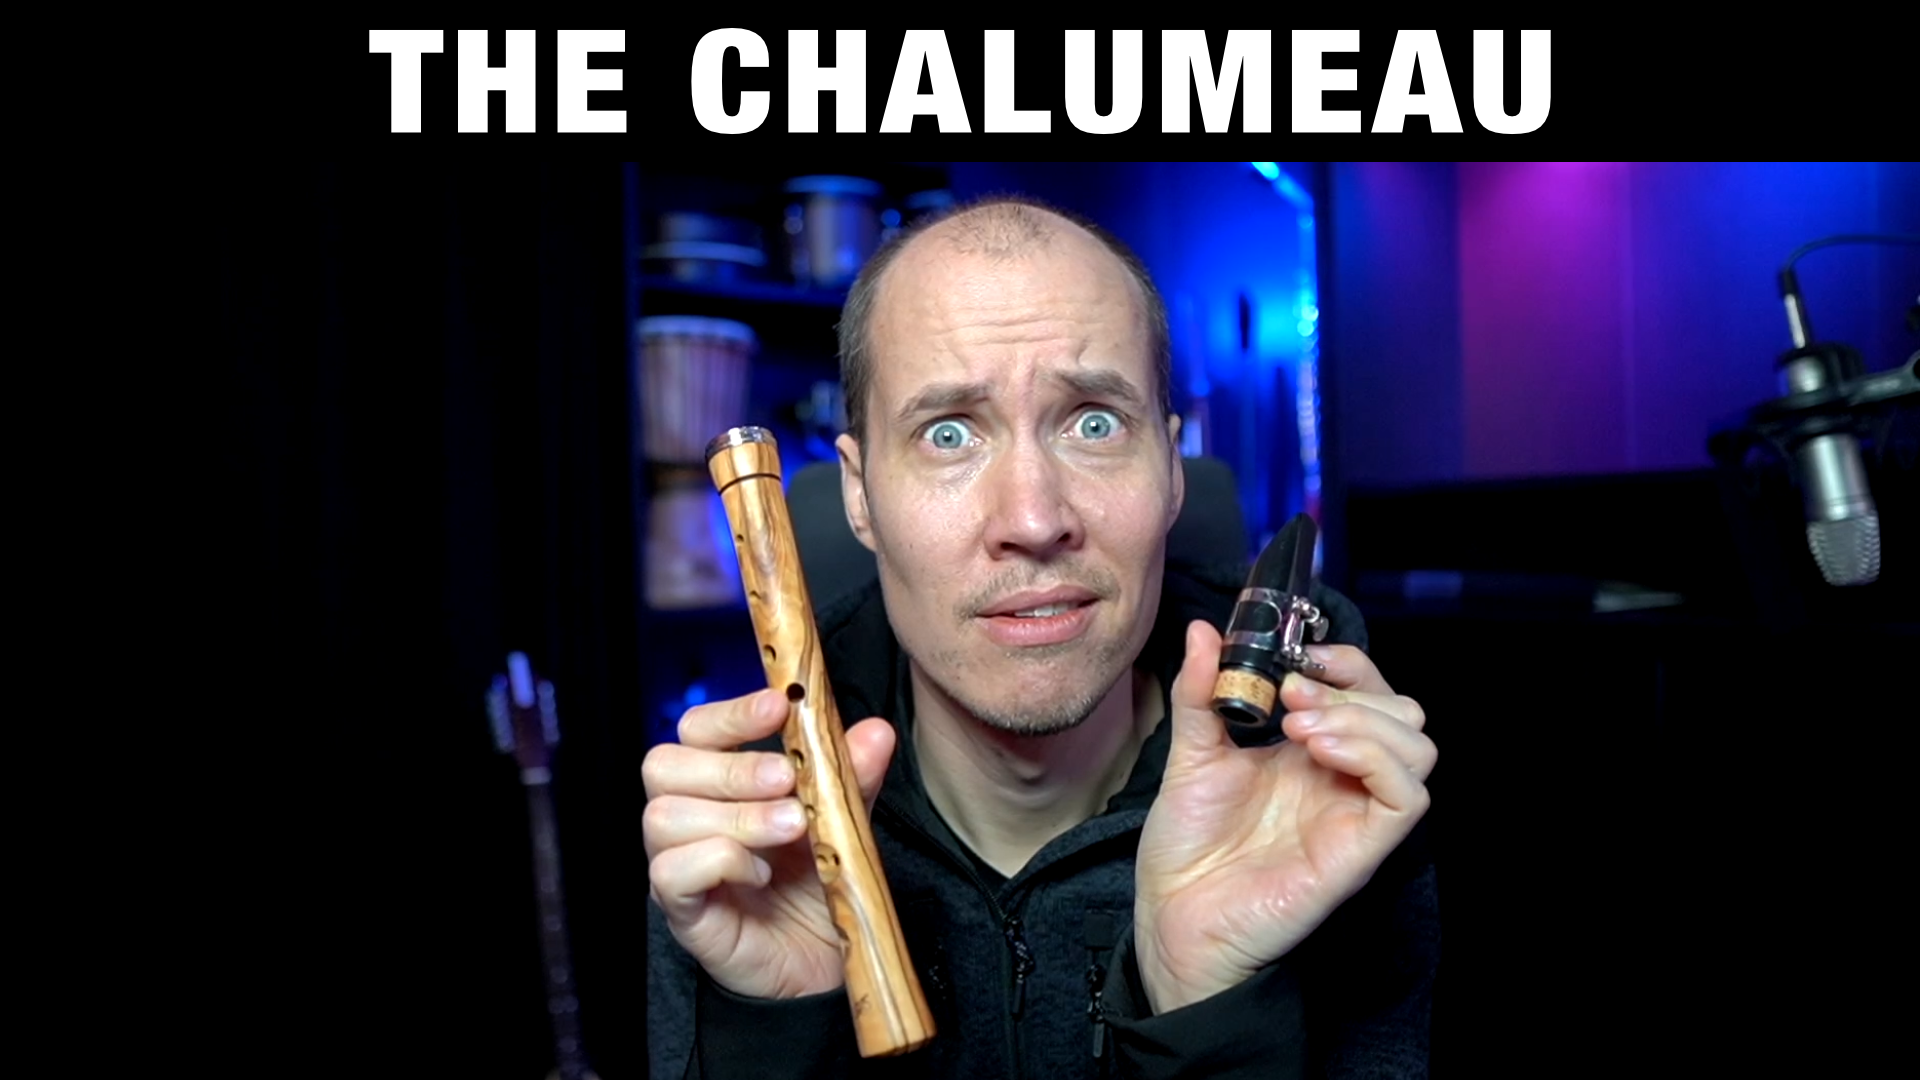 What is a Chalumeau